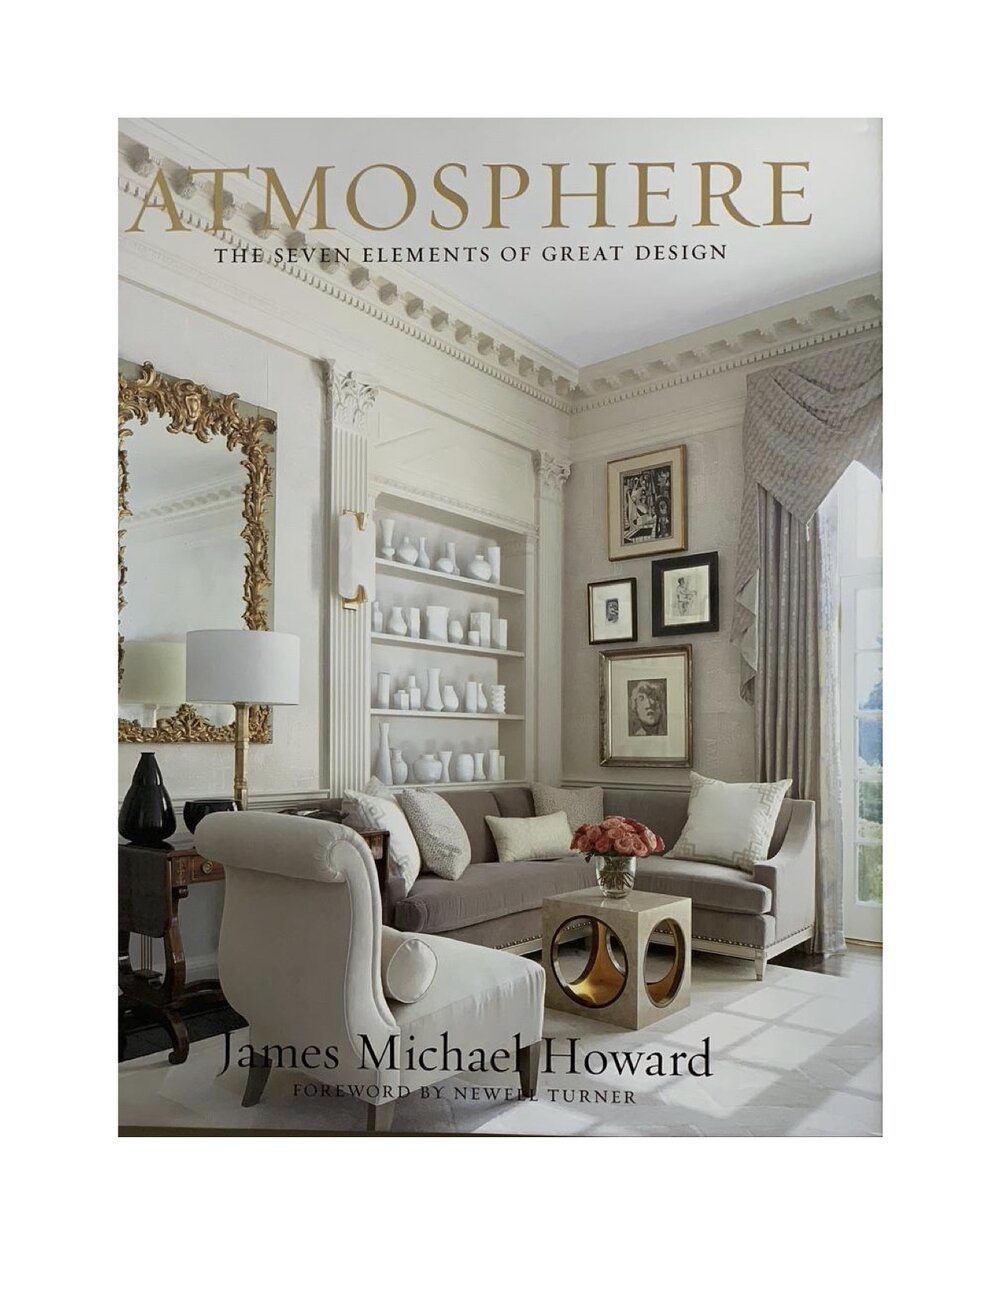 Atmosphere- The Seven Elements of Great Design